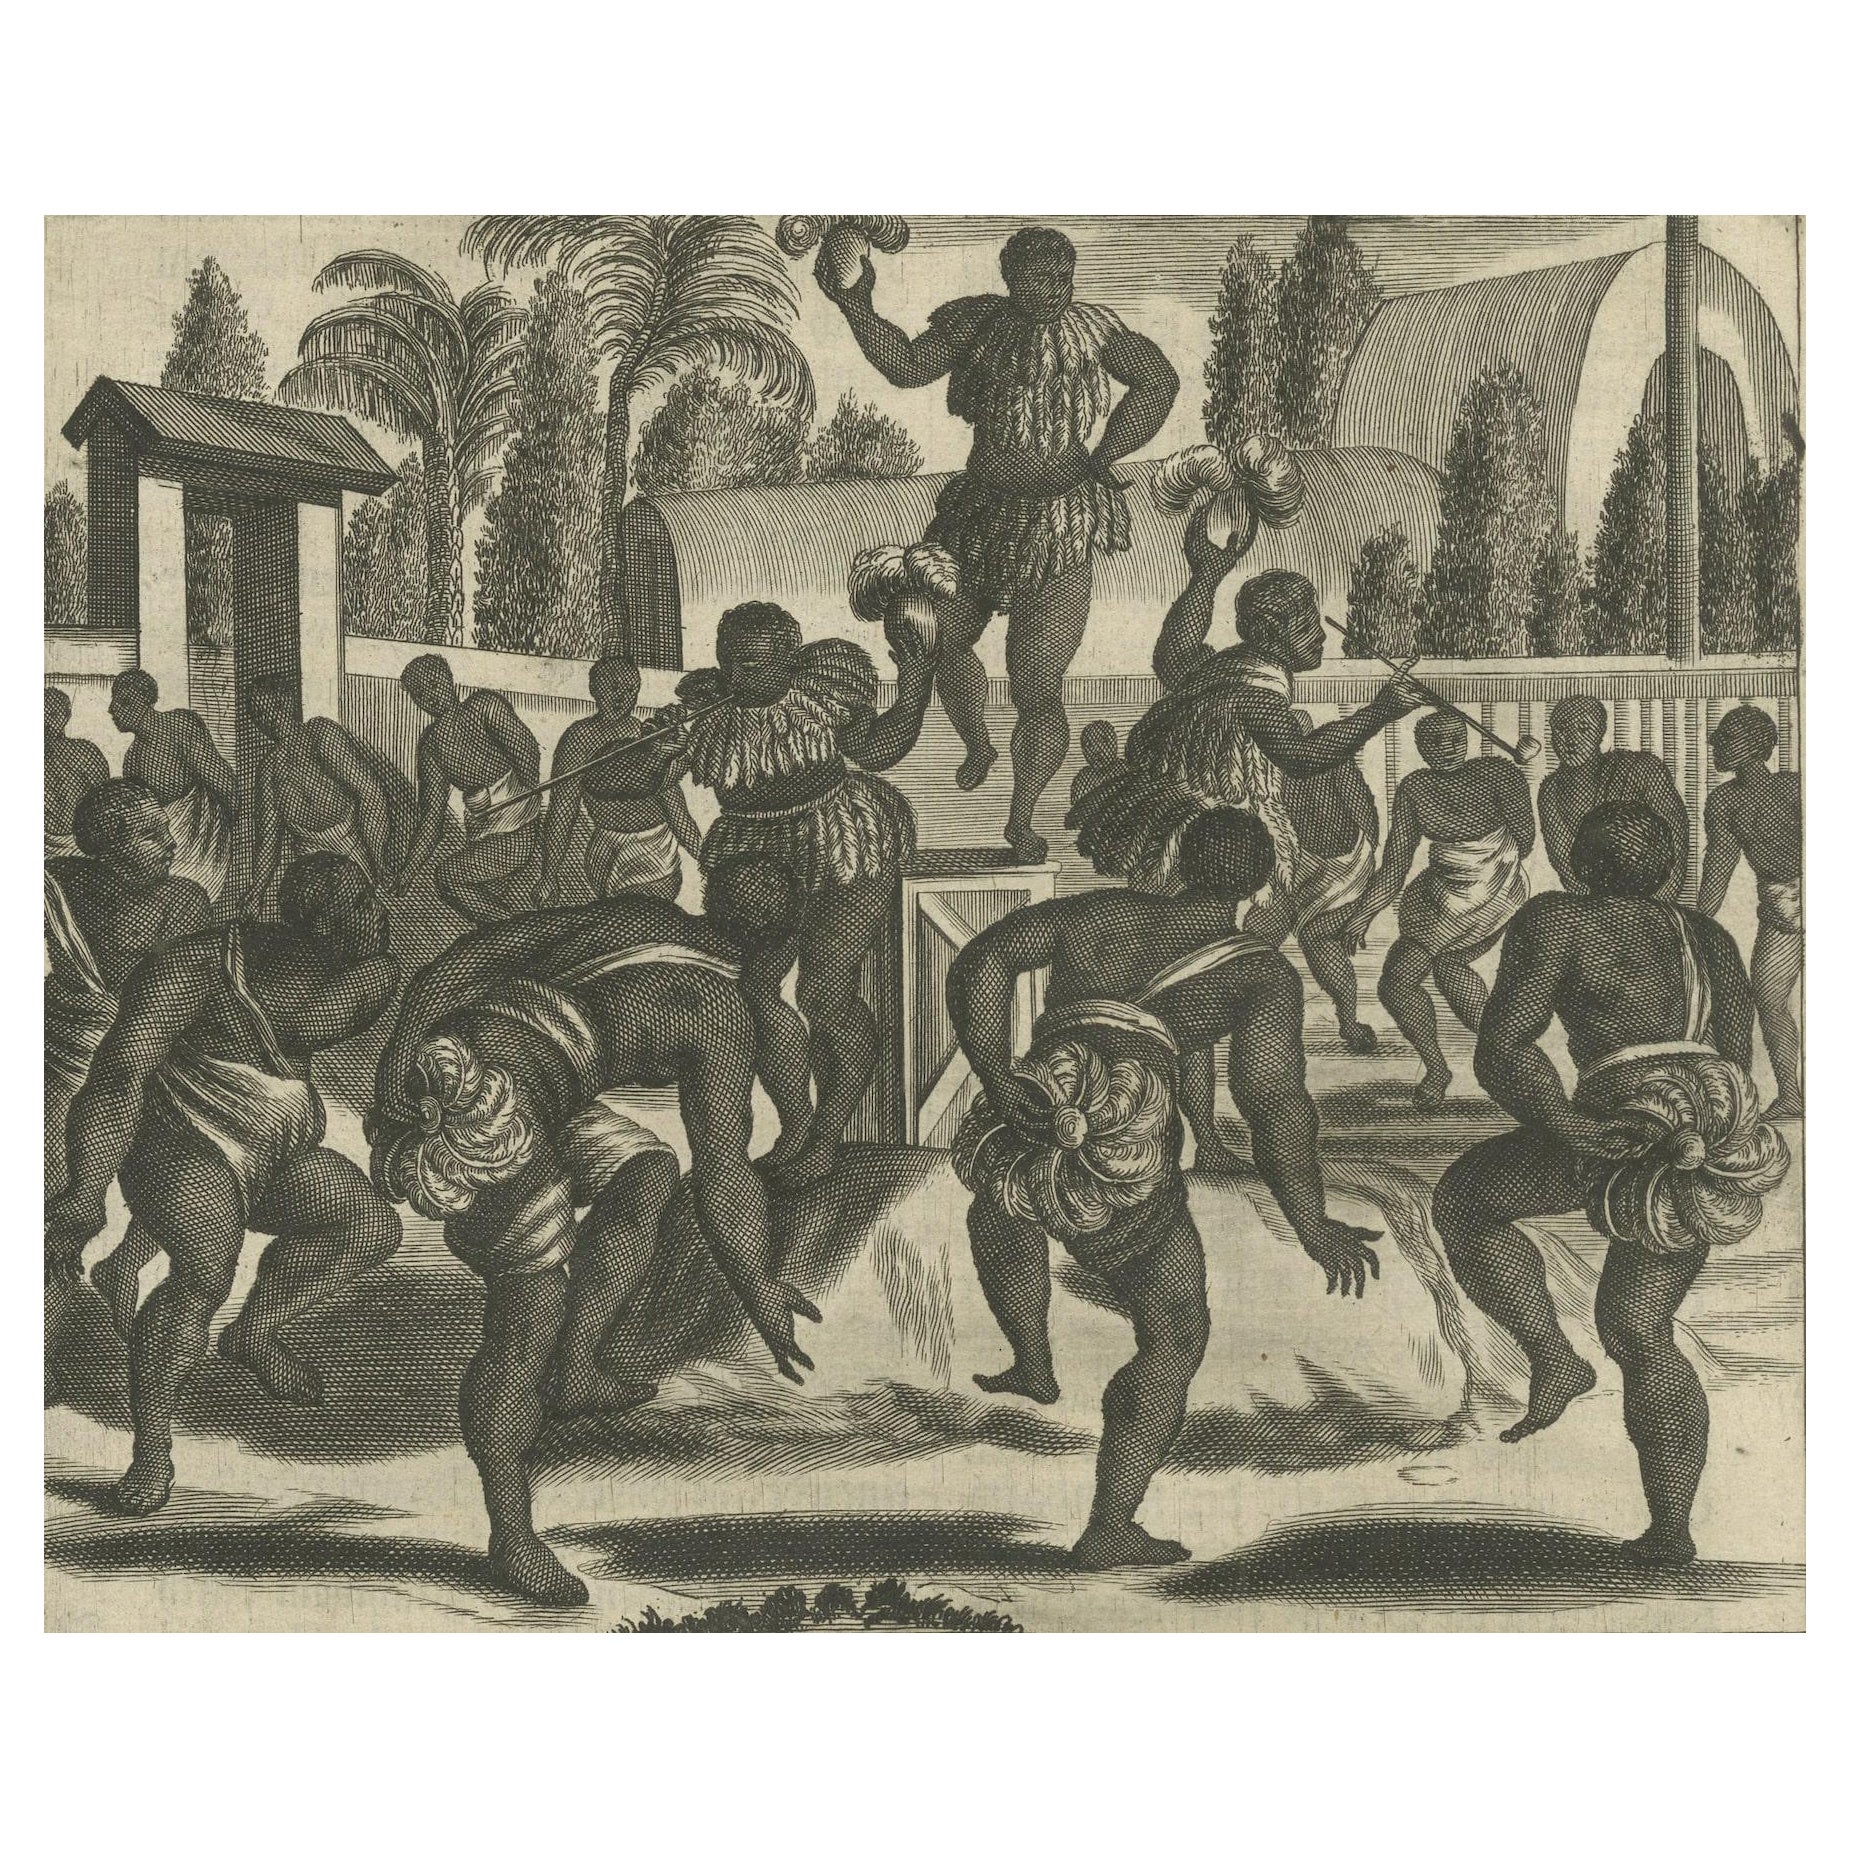 Ritual Dance in Brazil in the 17th Century on a Copper Engraving by Montanus